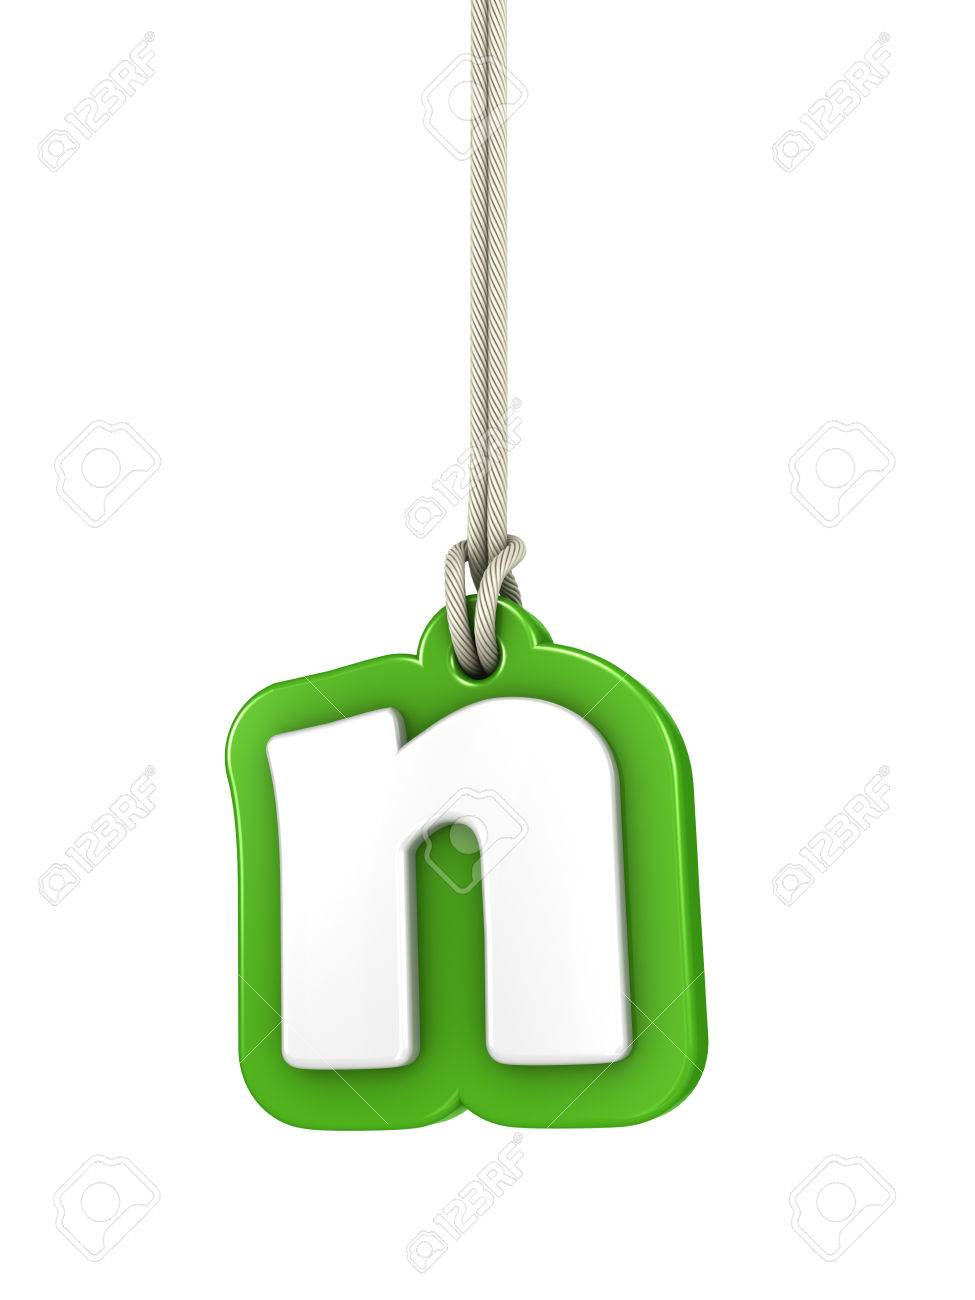 Green lowercase letter n hanging